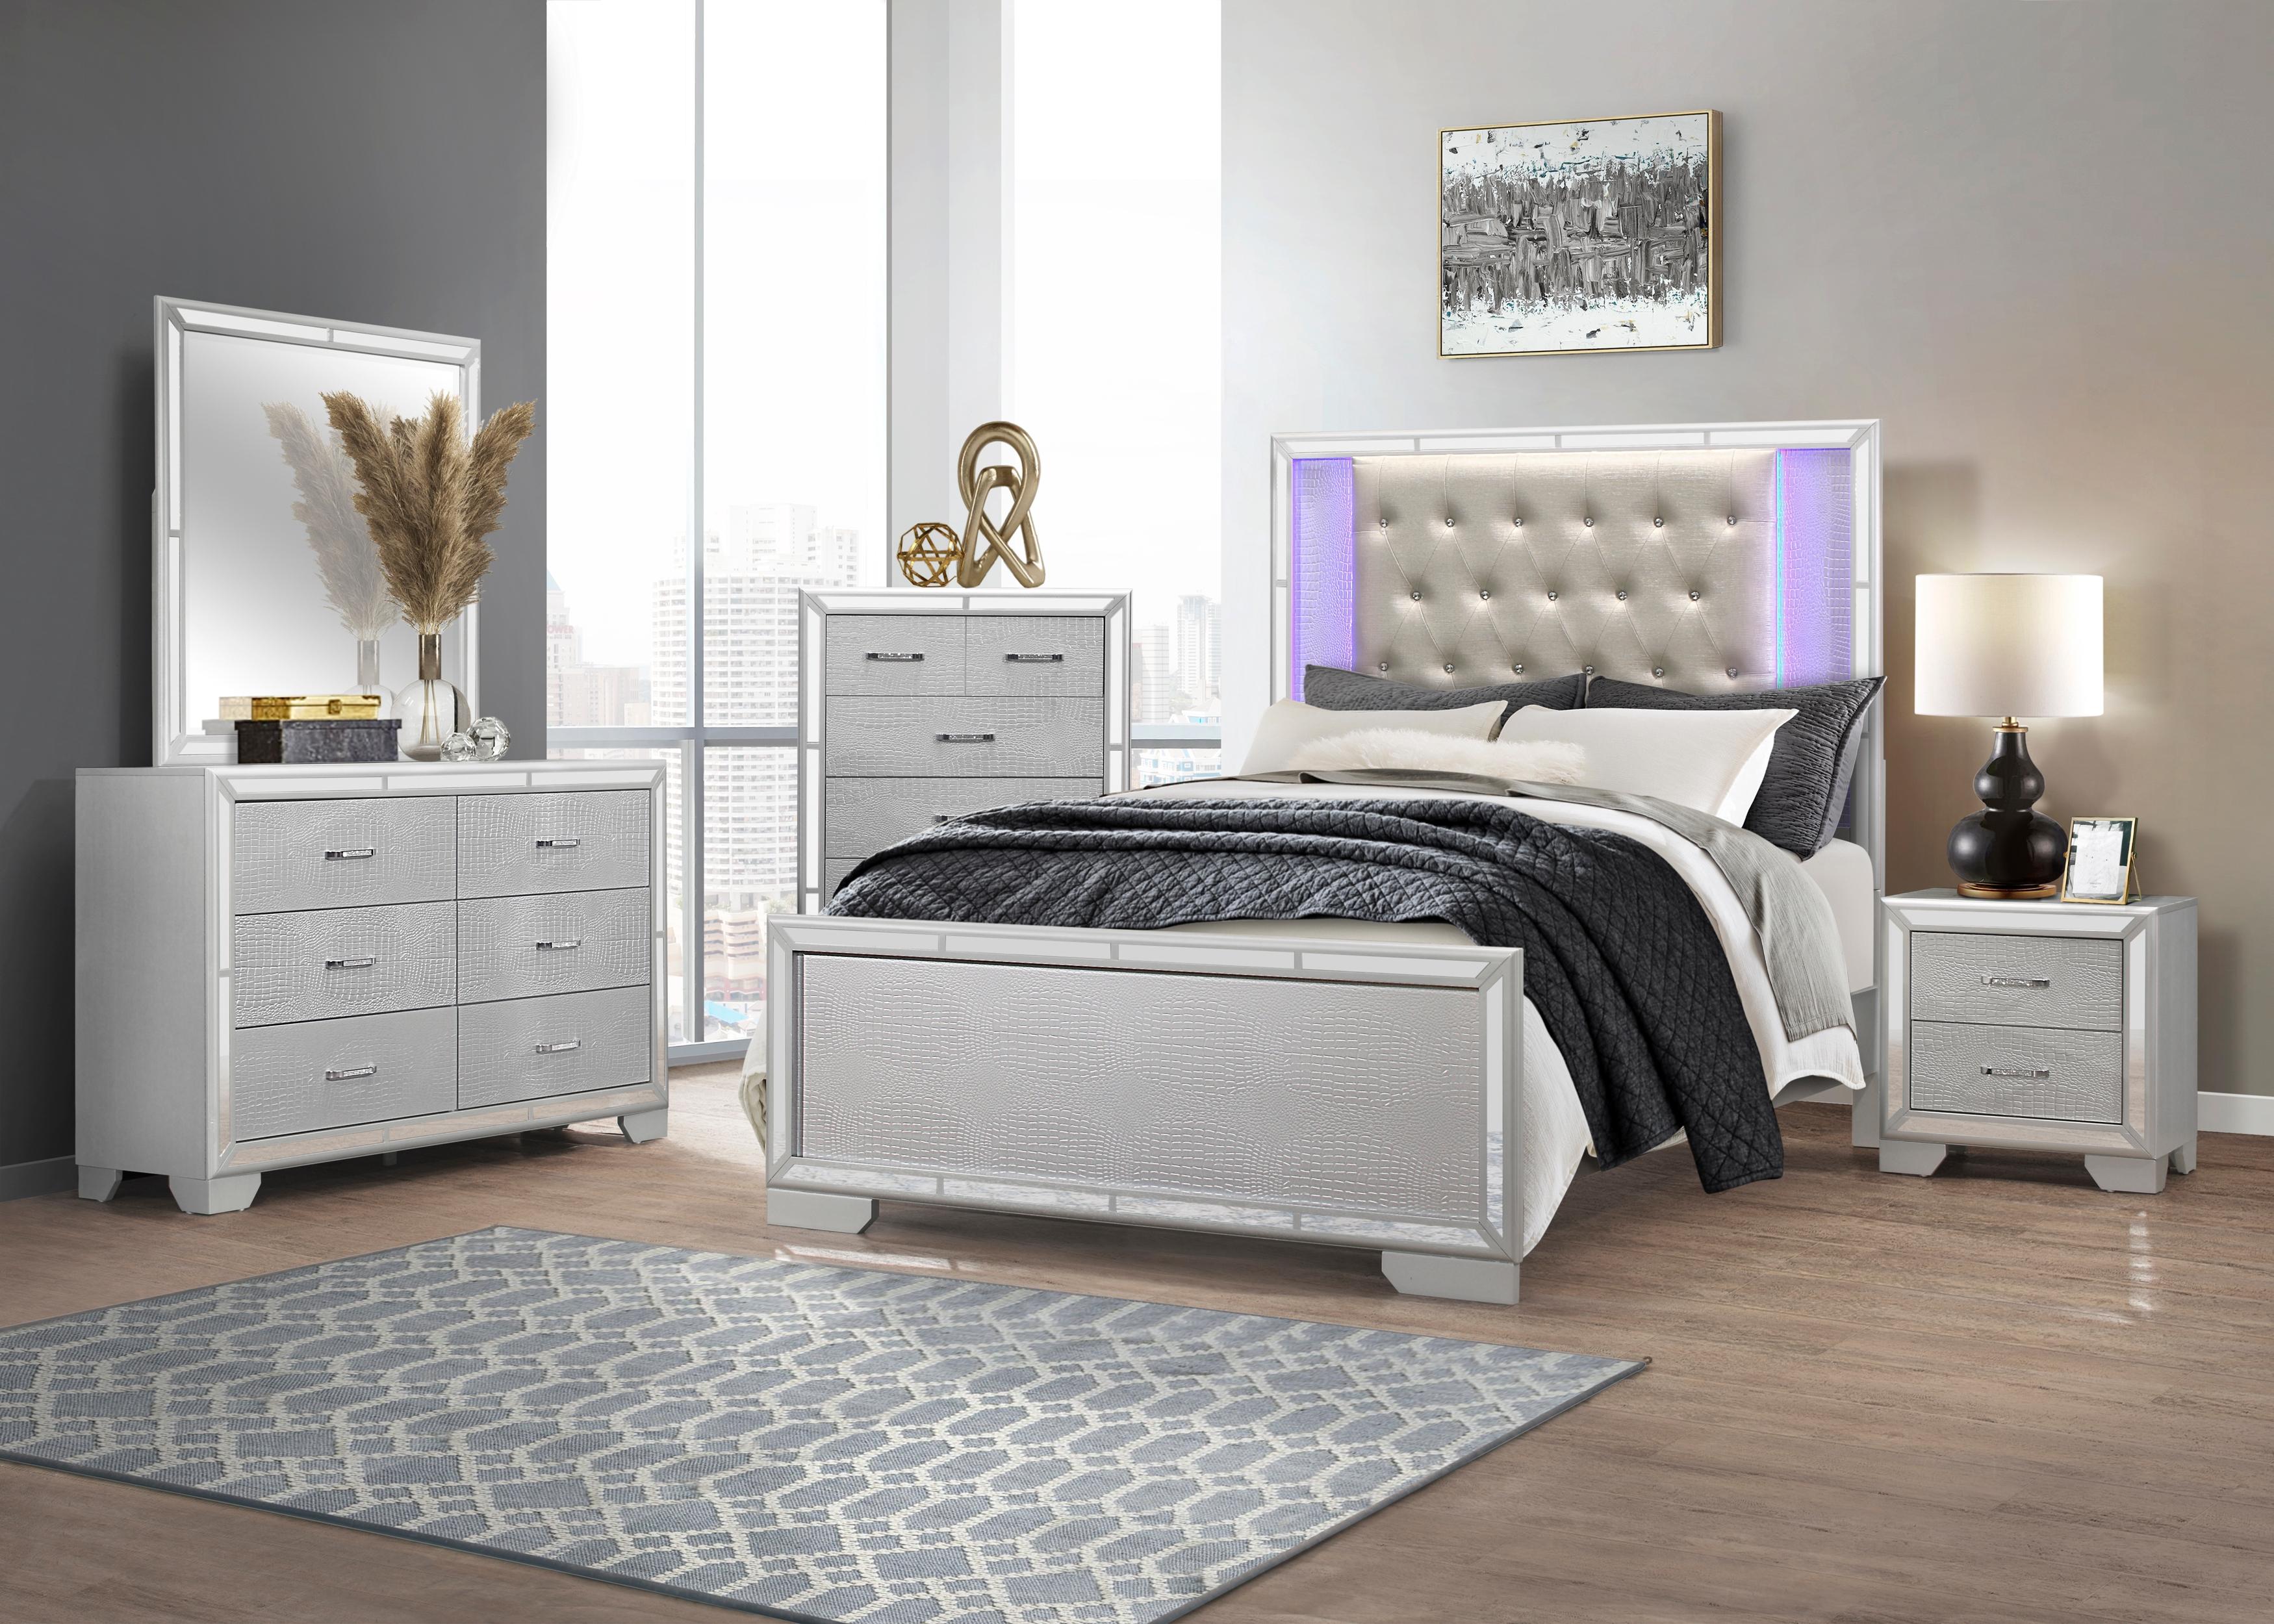 Modern Bedroom Set 1428SV-1-3PC Aveline 1428SV-1-3PC in Silver Faux Leather